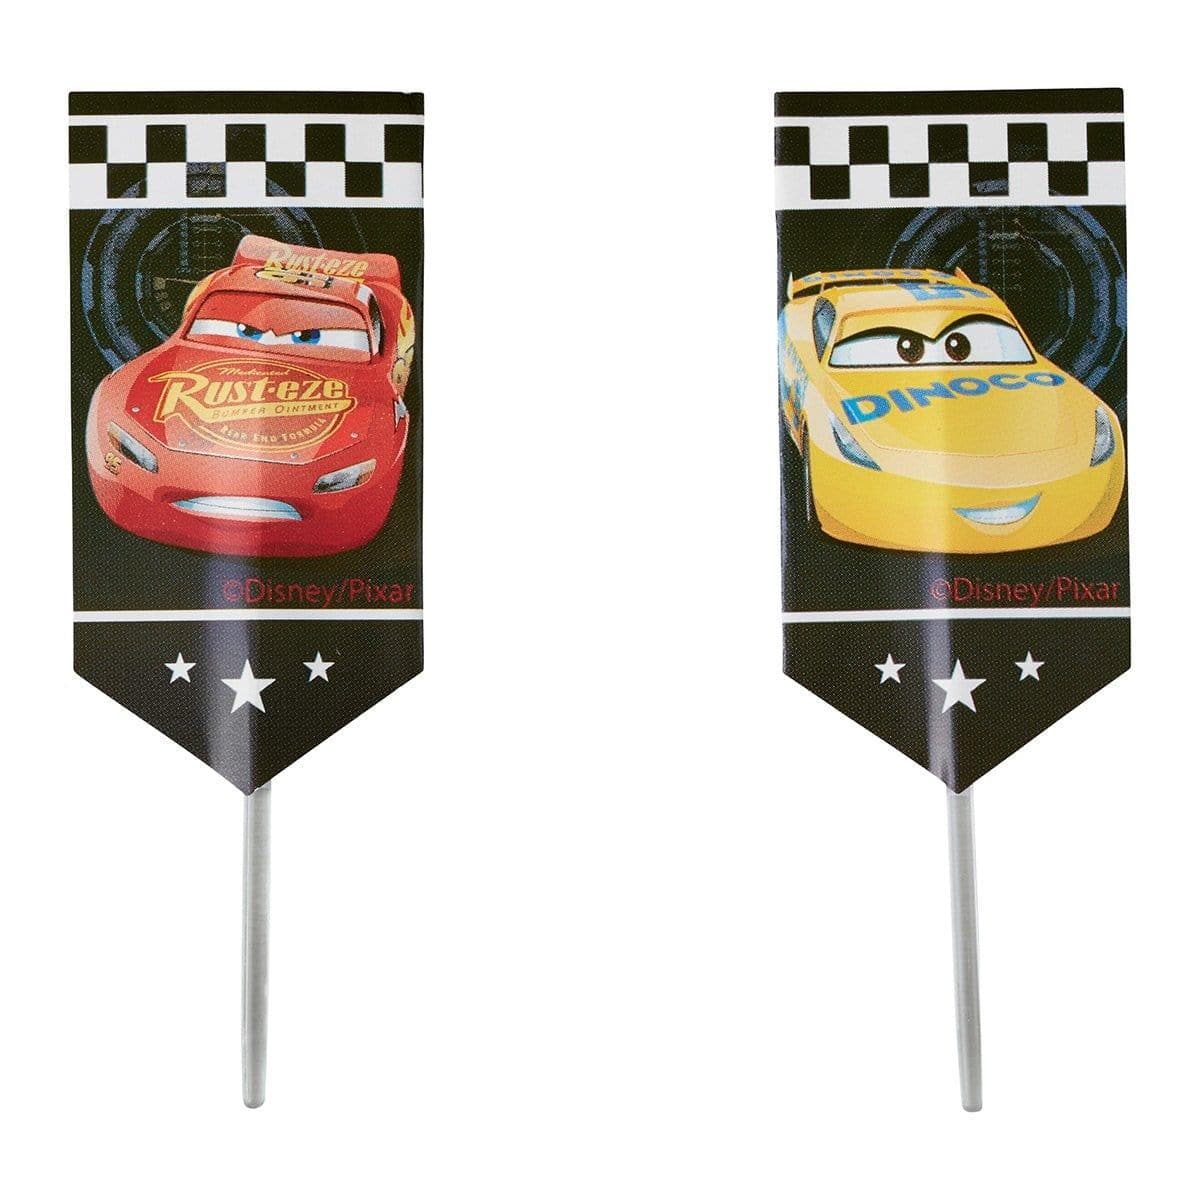 Buy Kids Birthday Cars 3 plastic picks, 24 per package sold at Party Expert